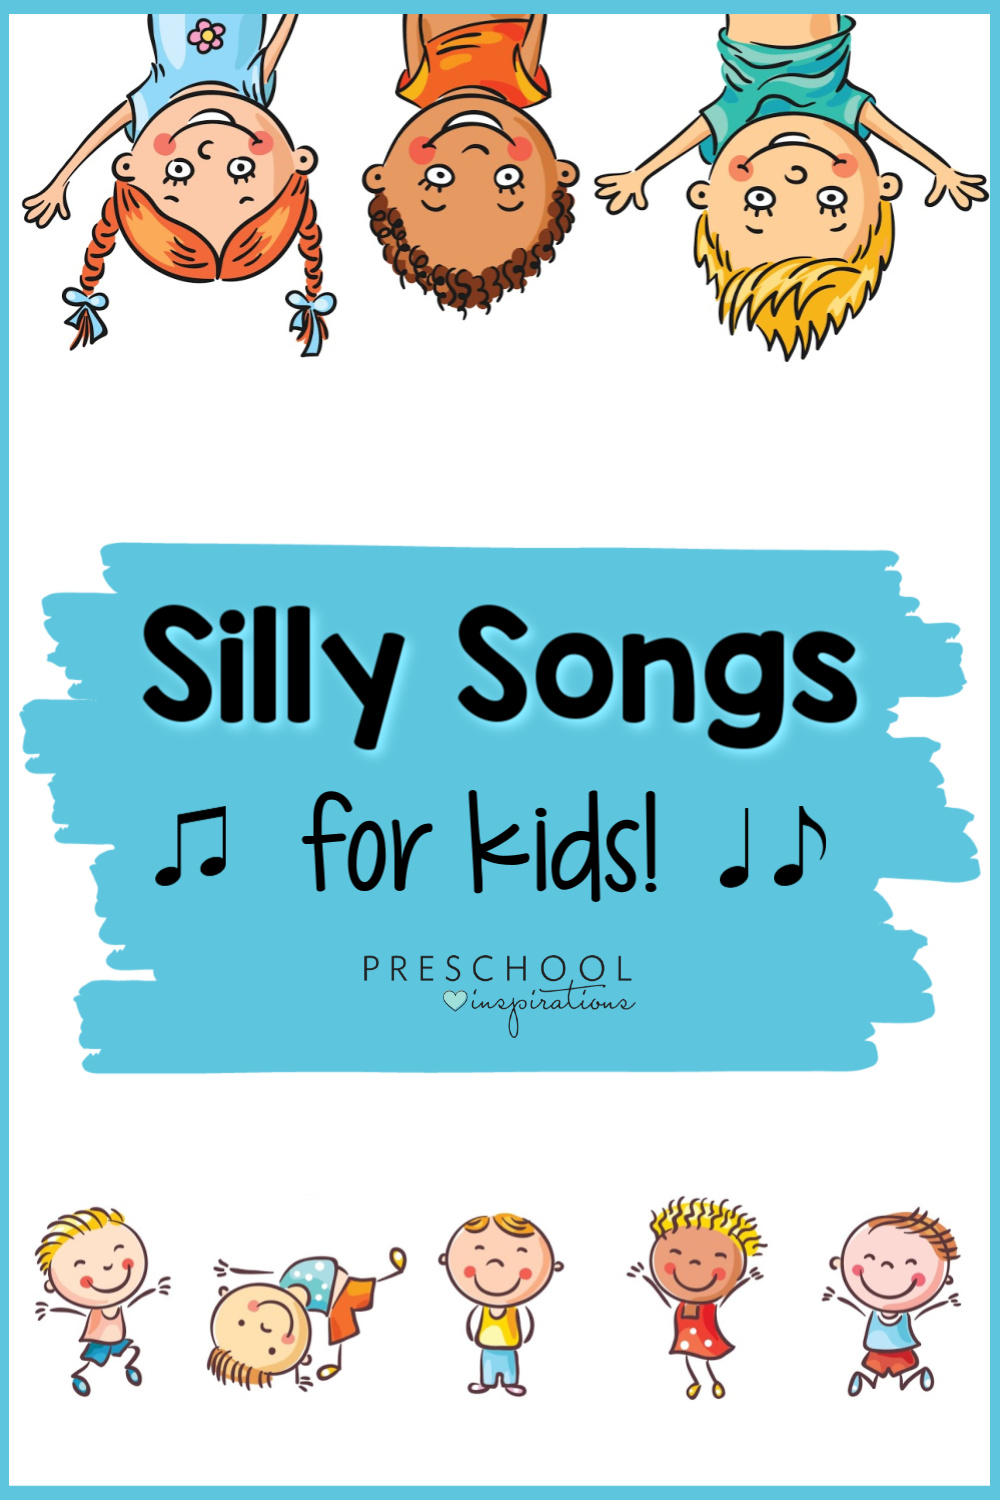 Silly songs for kids are great for stress relief, brain breaks, behavior management, or when you just need a good giggle! These fun songs for preschoolers and kids will have them smiling in no time - maybe even you, too!